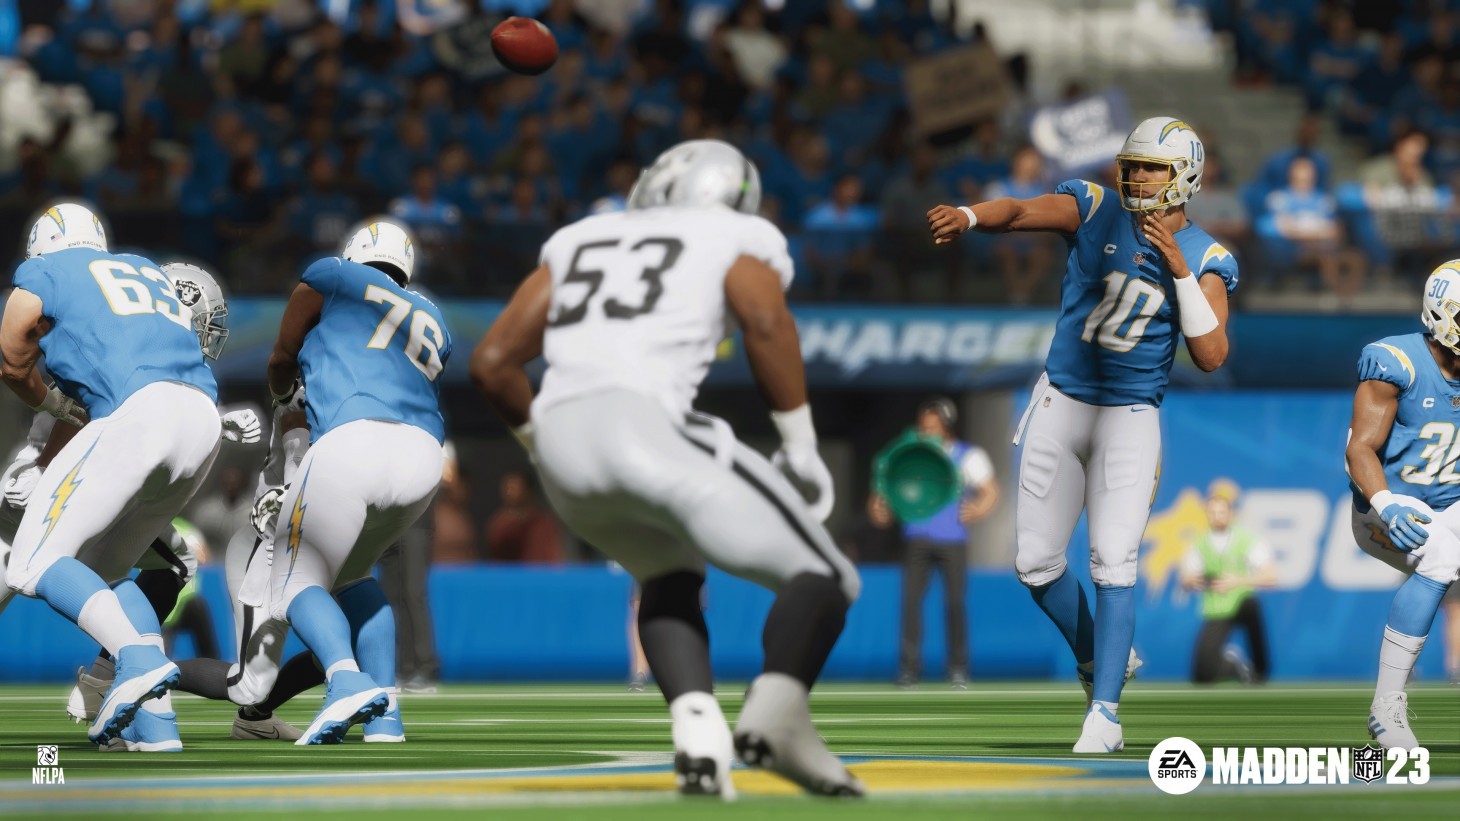 Madden ratings hotline gets 1,000 calls hours after launch